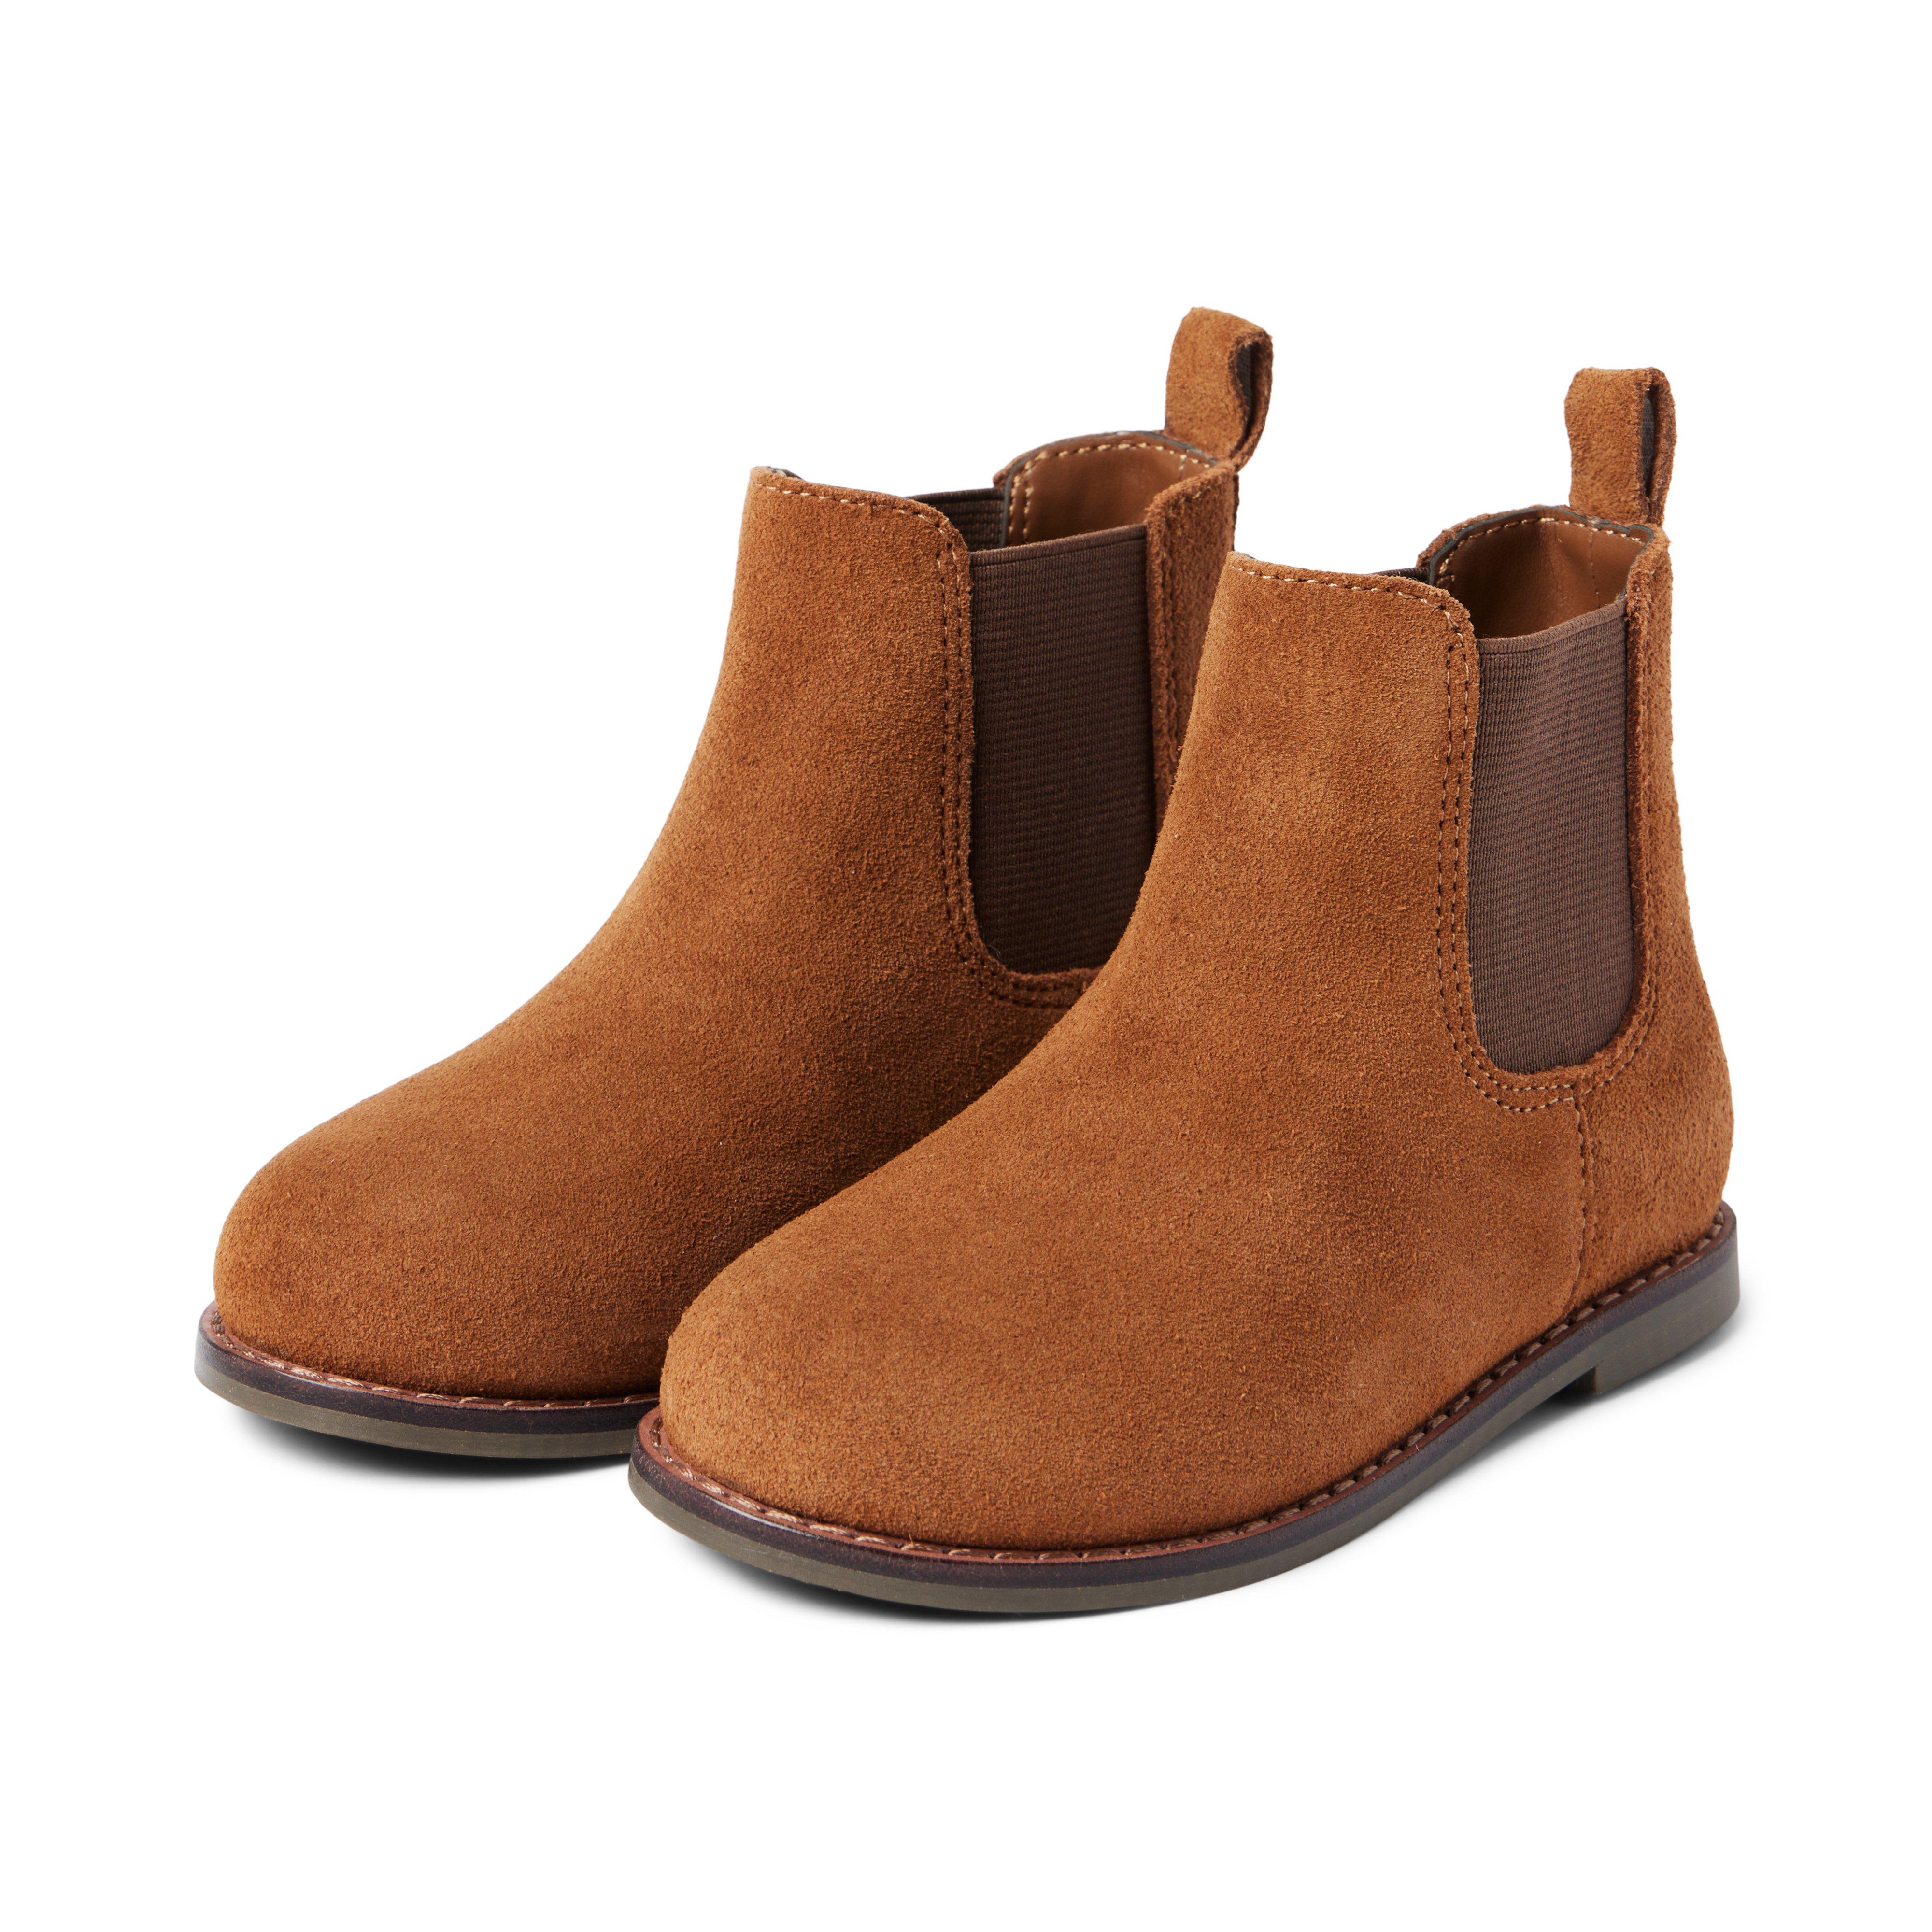 The Suede Chelsea Boot